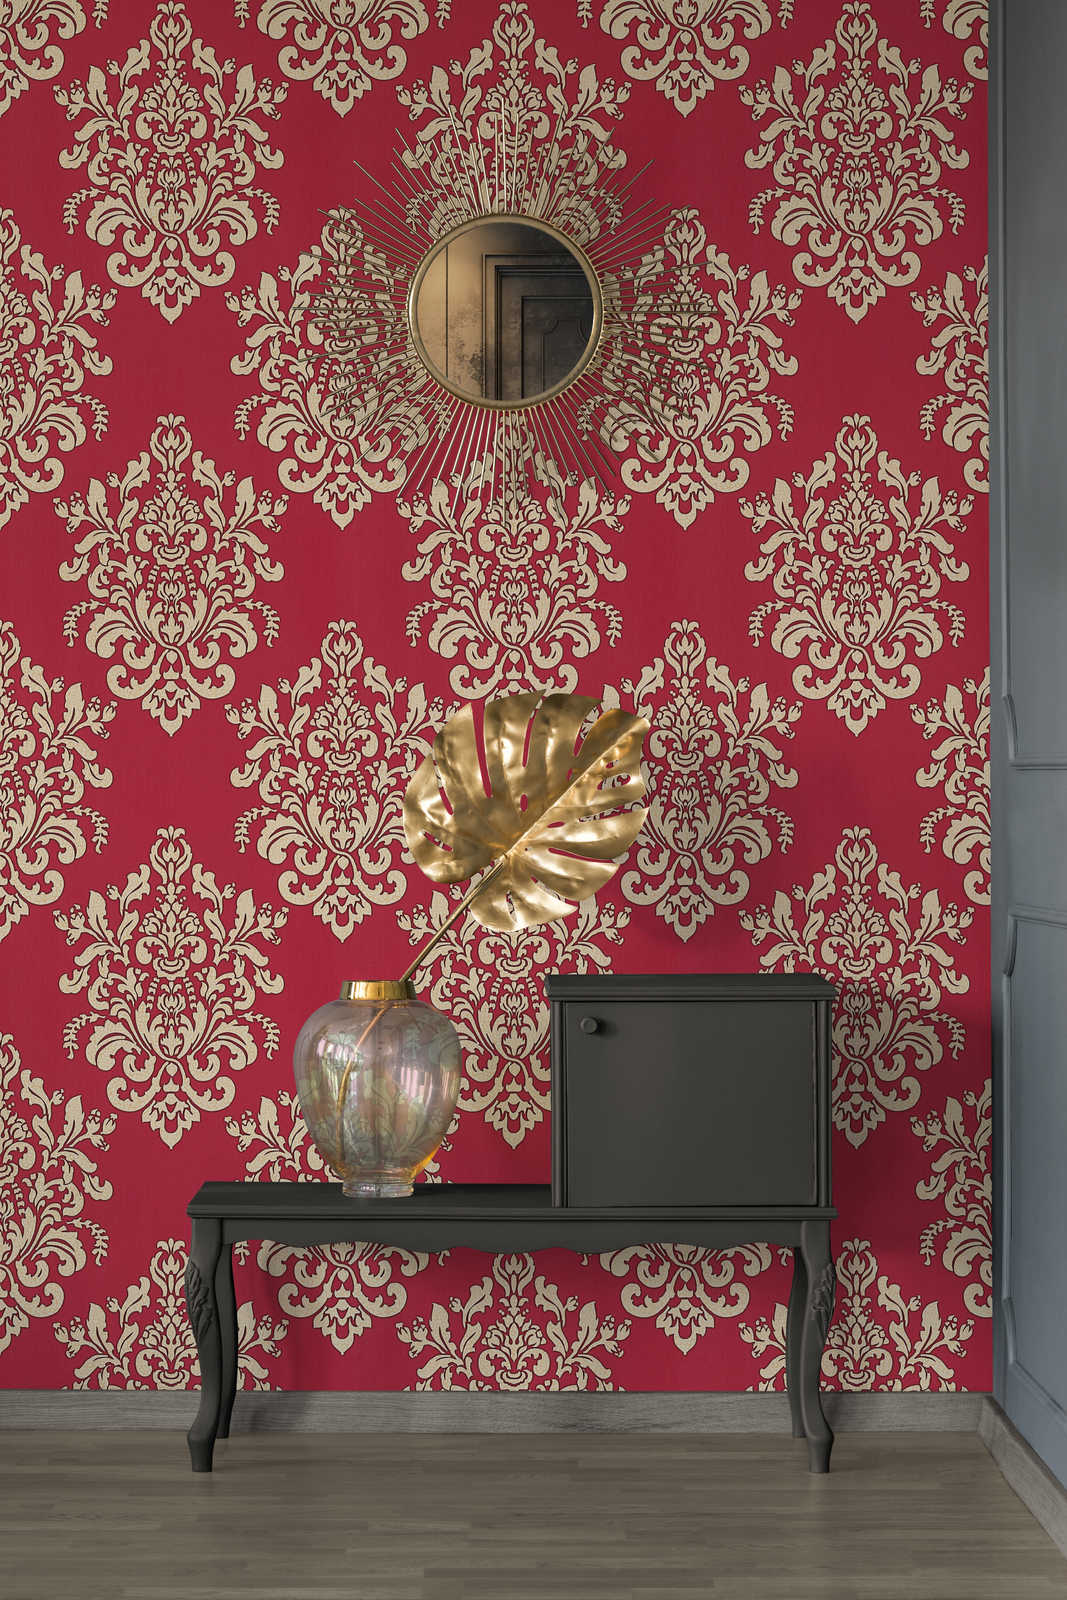             Ornament wallpaper with crackle effect - beige, red
        